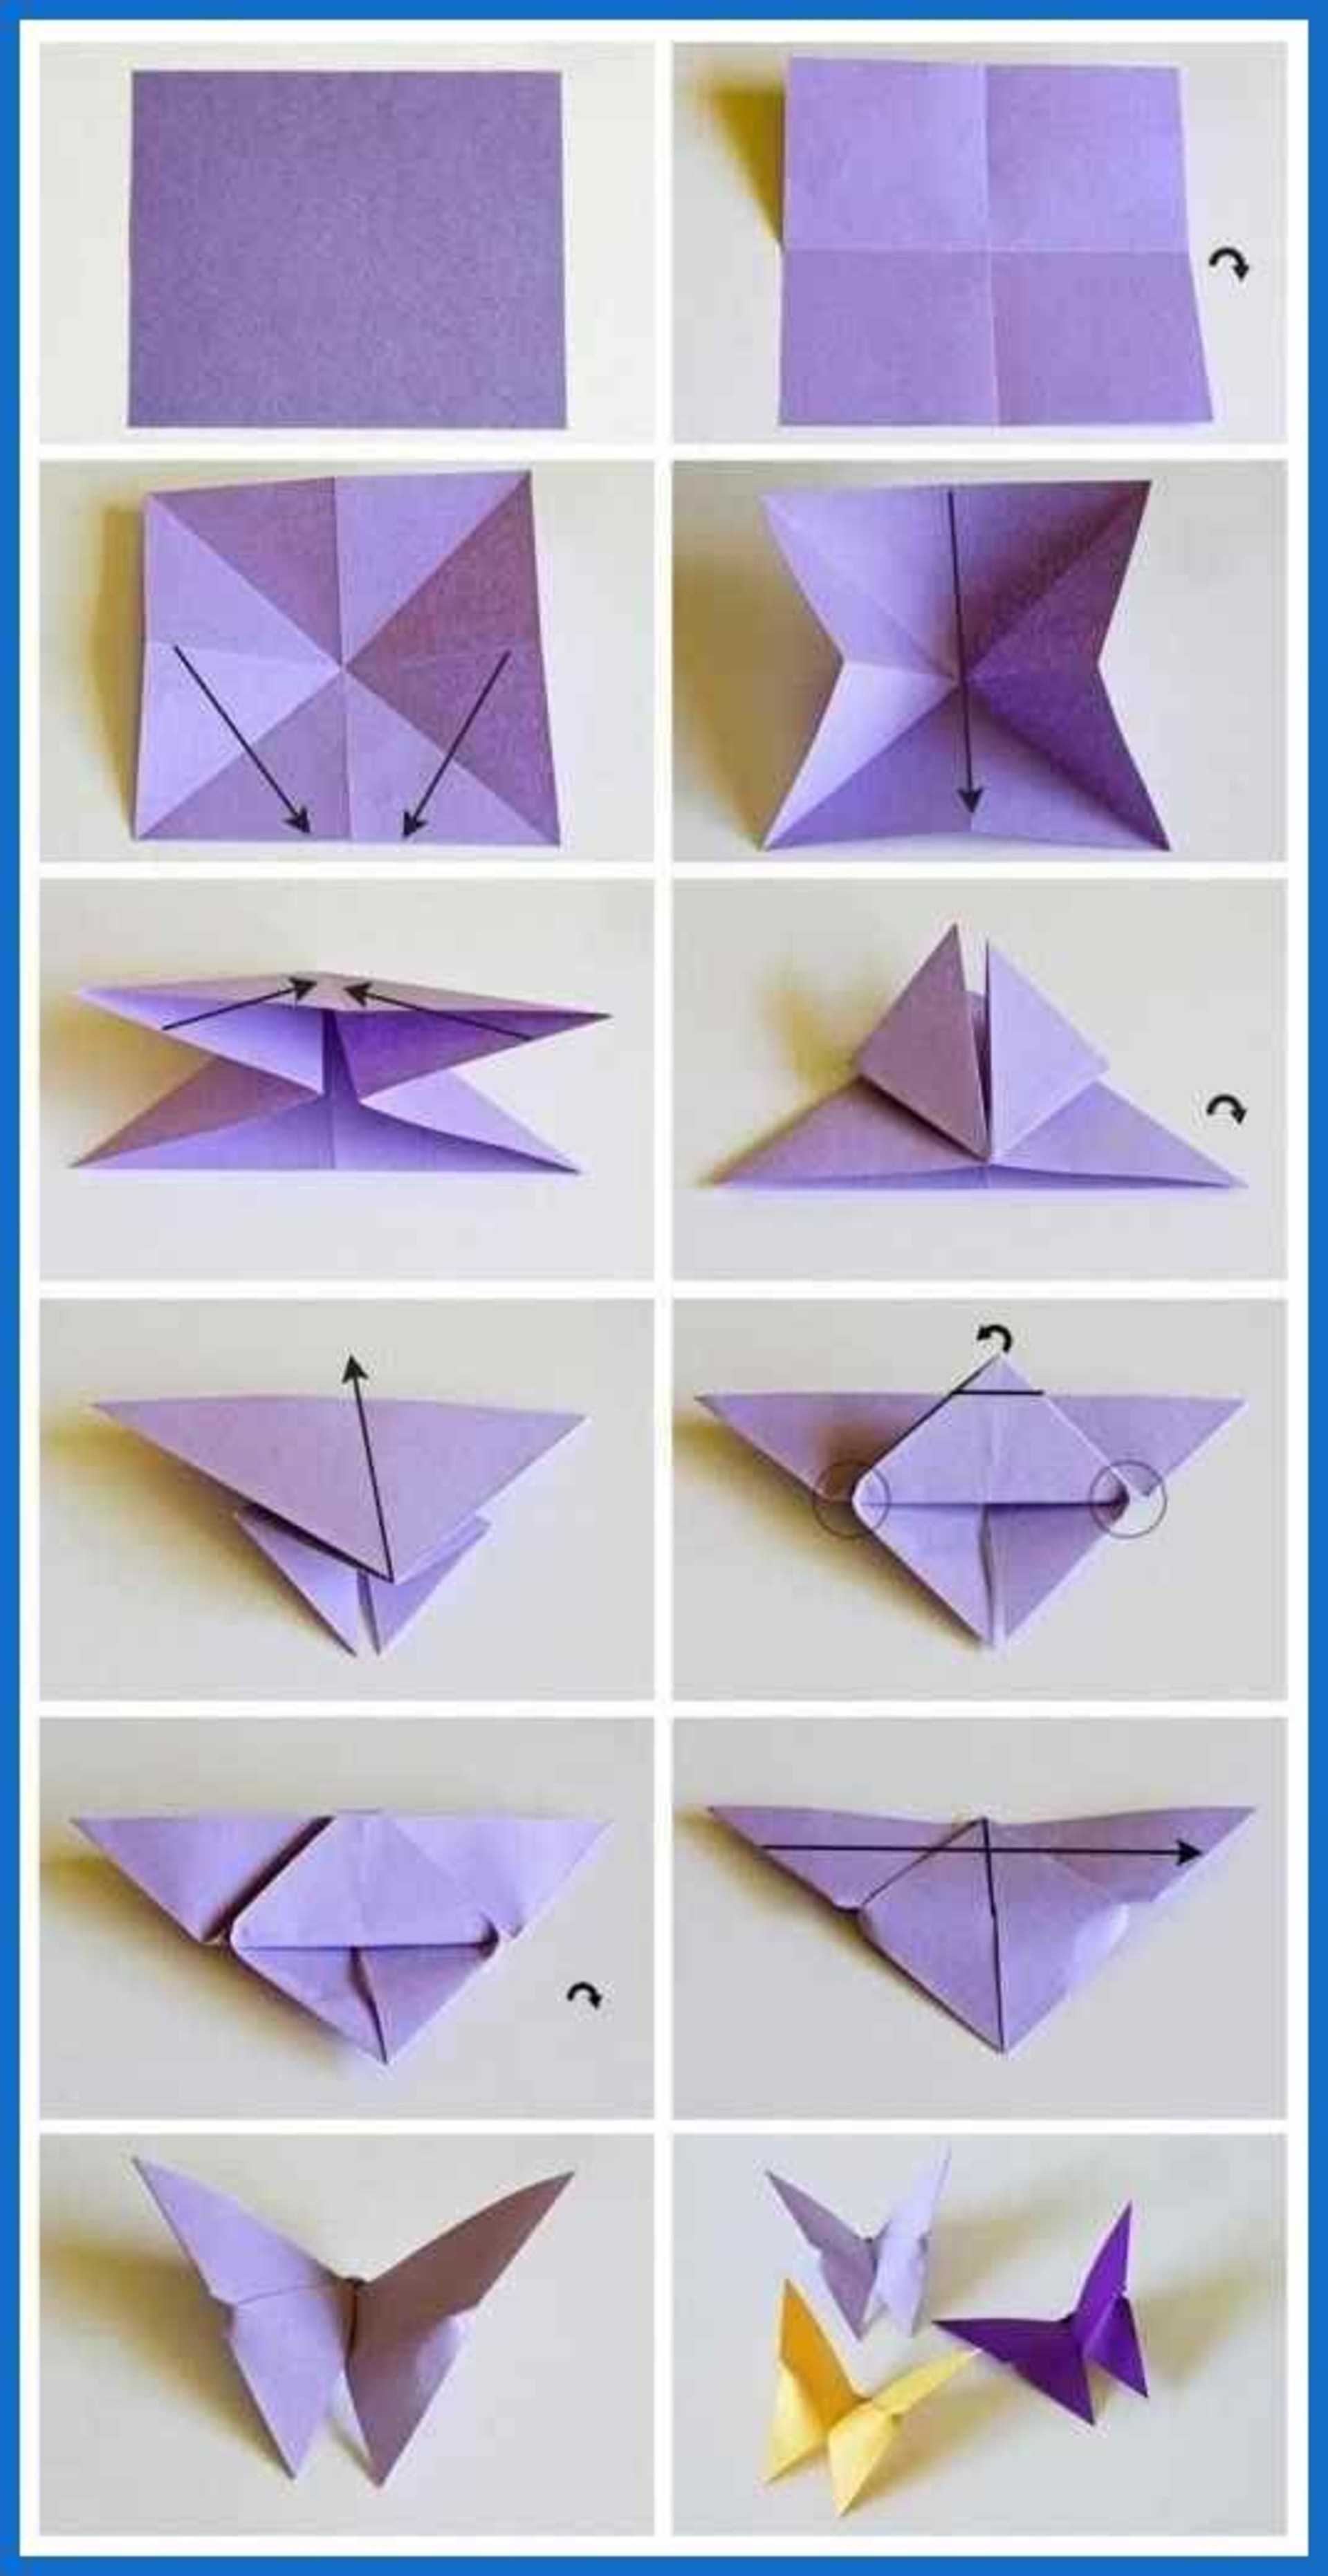 Origami Butterfly Wall 947a9042 Origami Butterflies How To Make A Paper Butterfly Easy